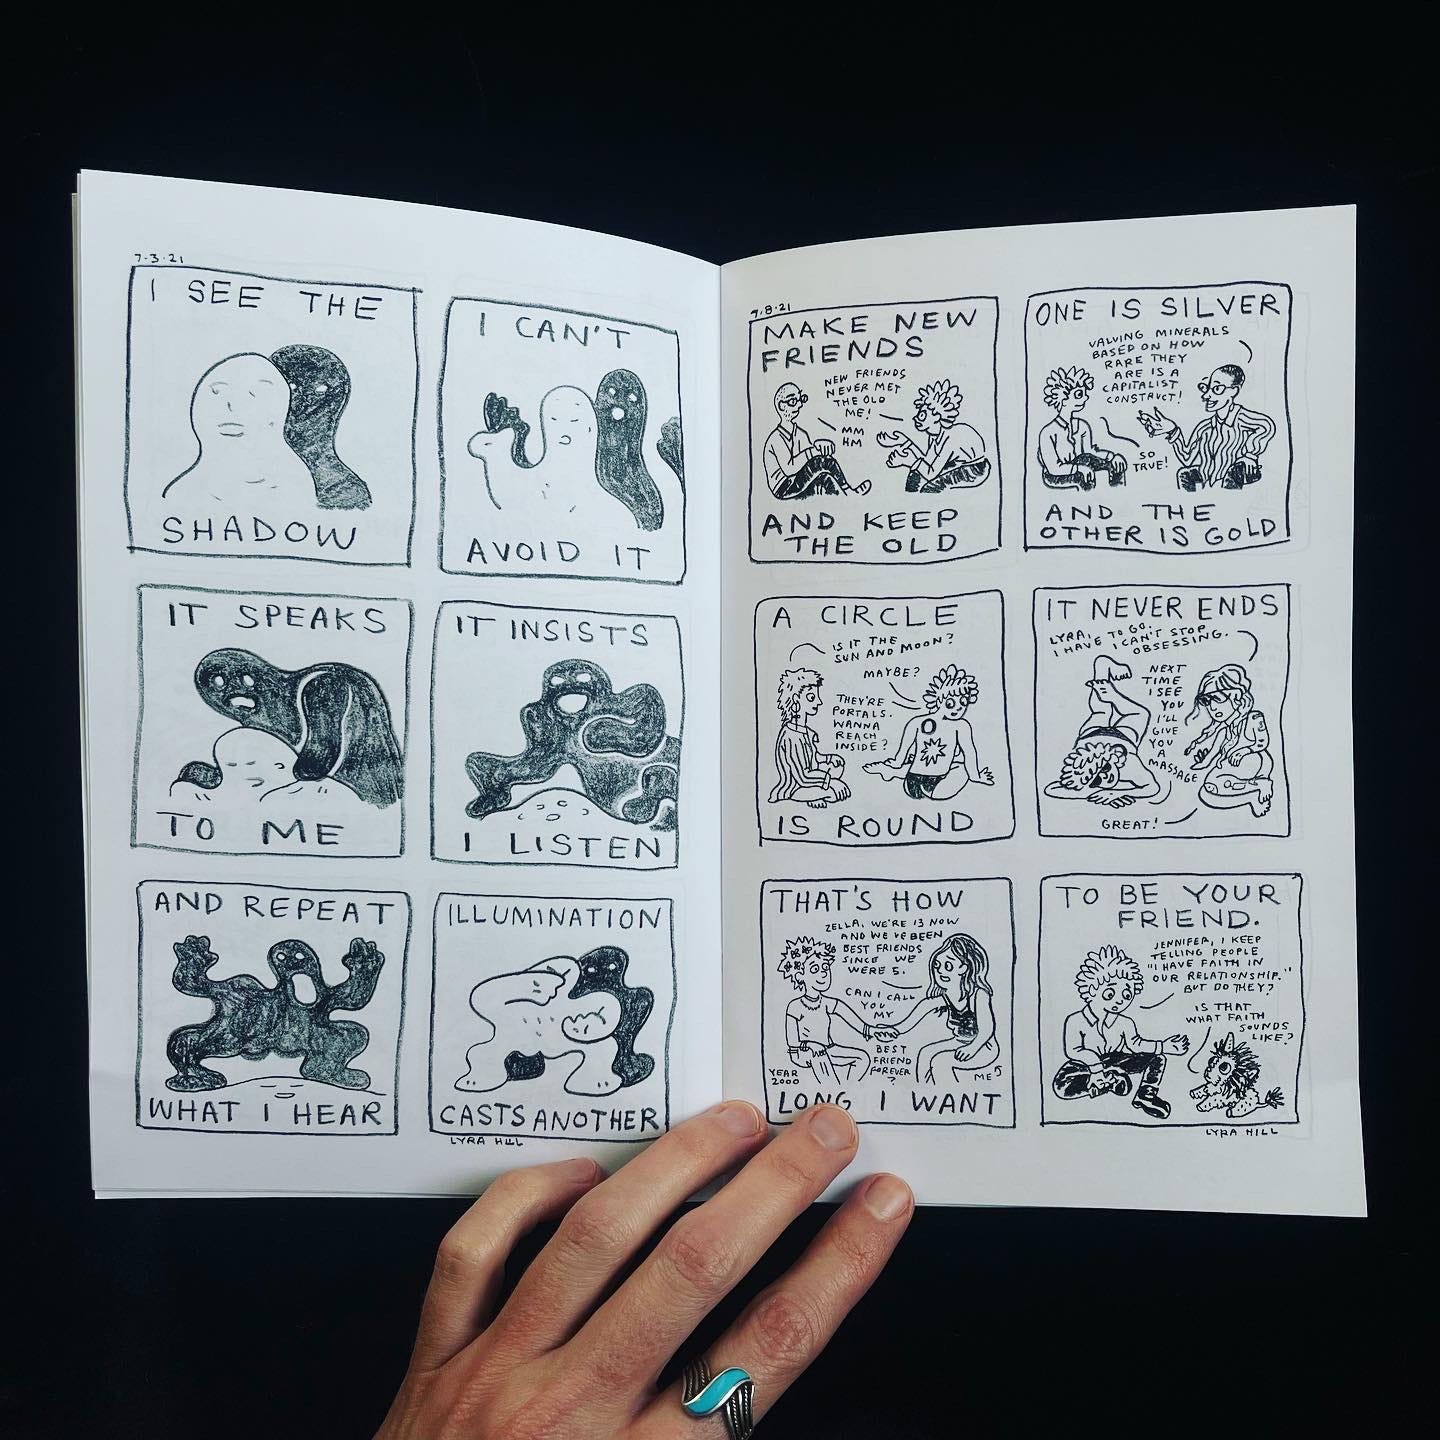 The new zine is open to a page showing two comics.